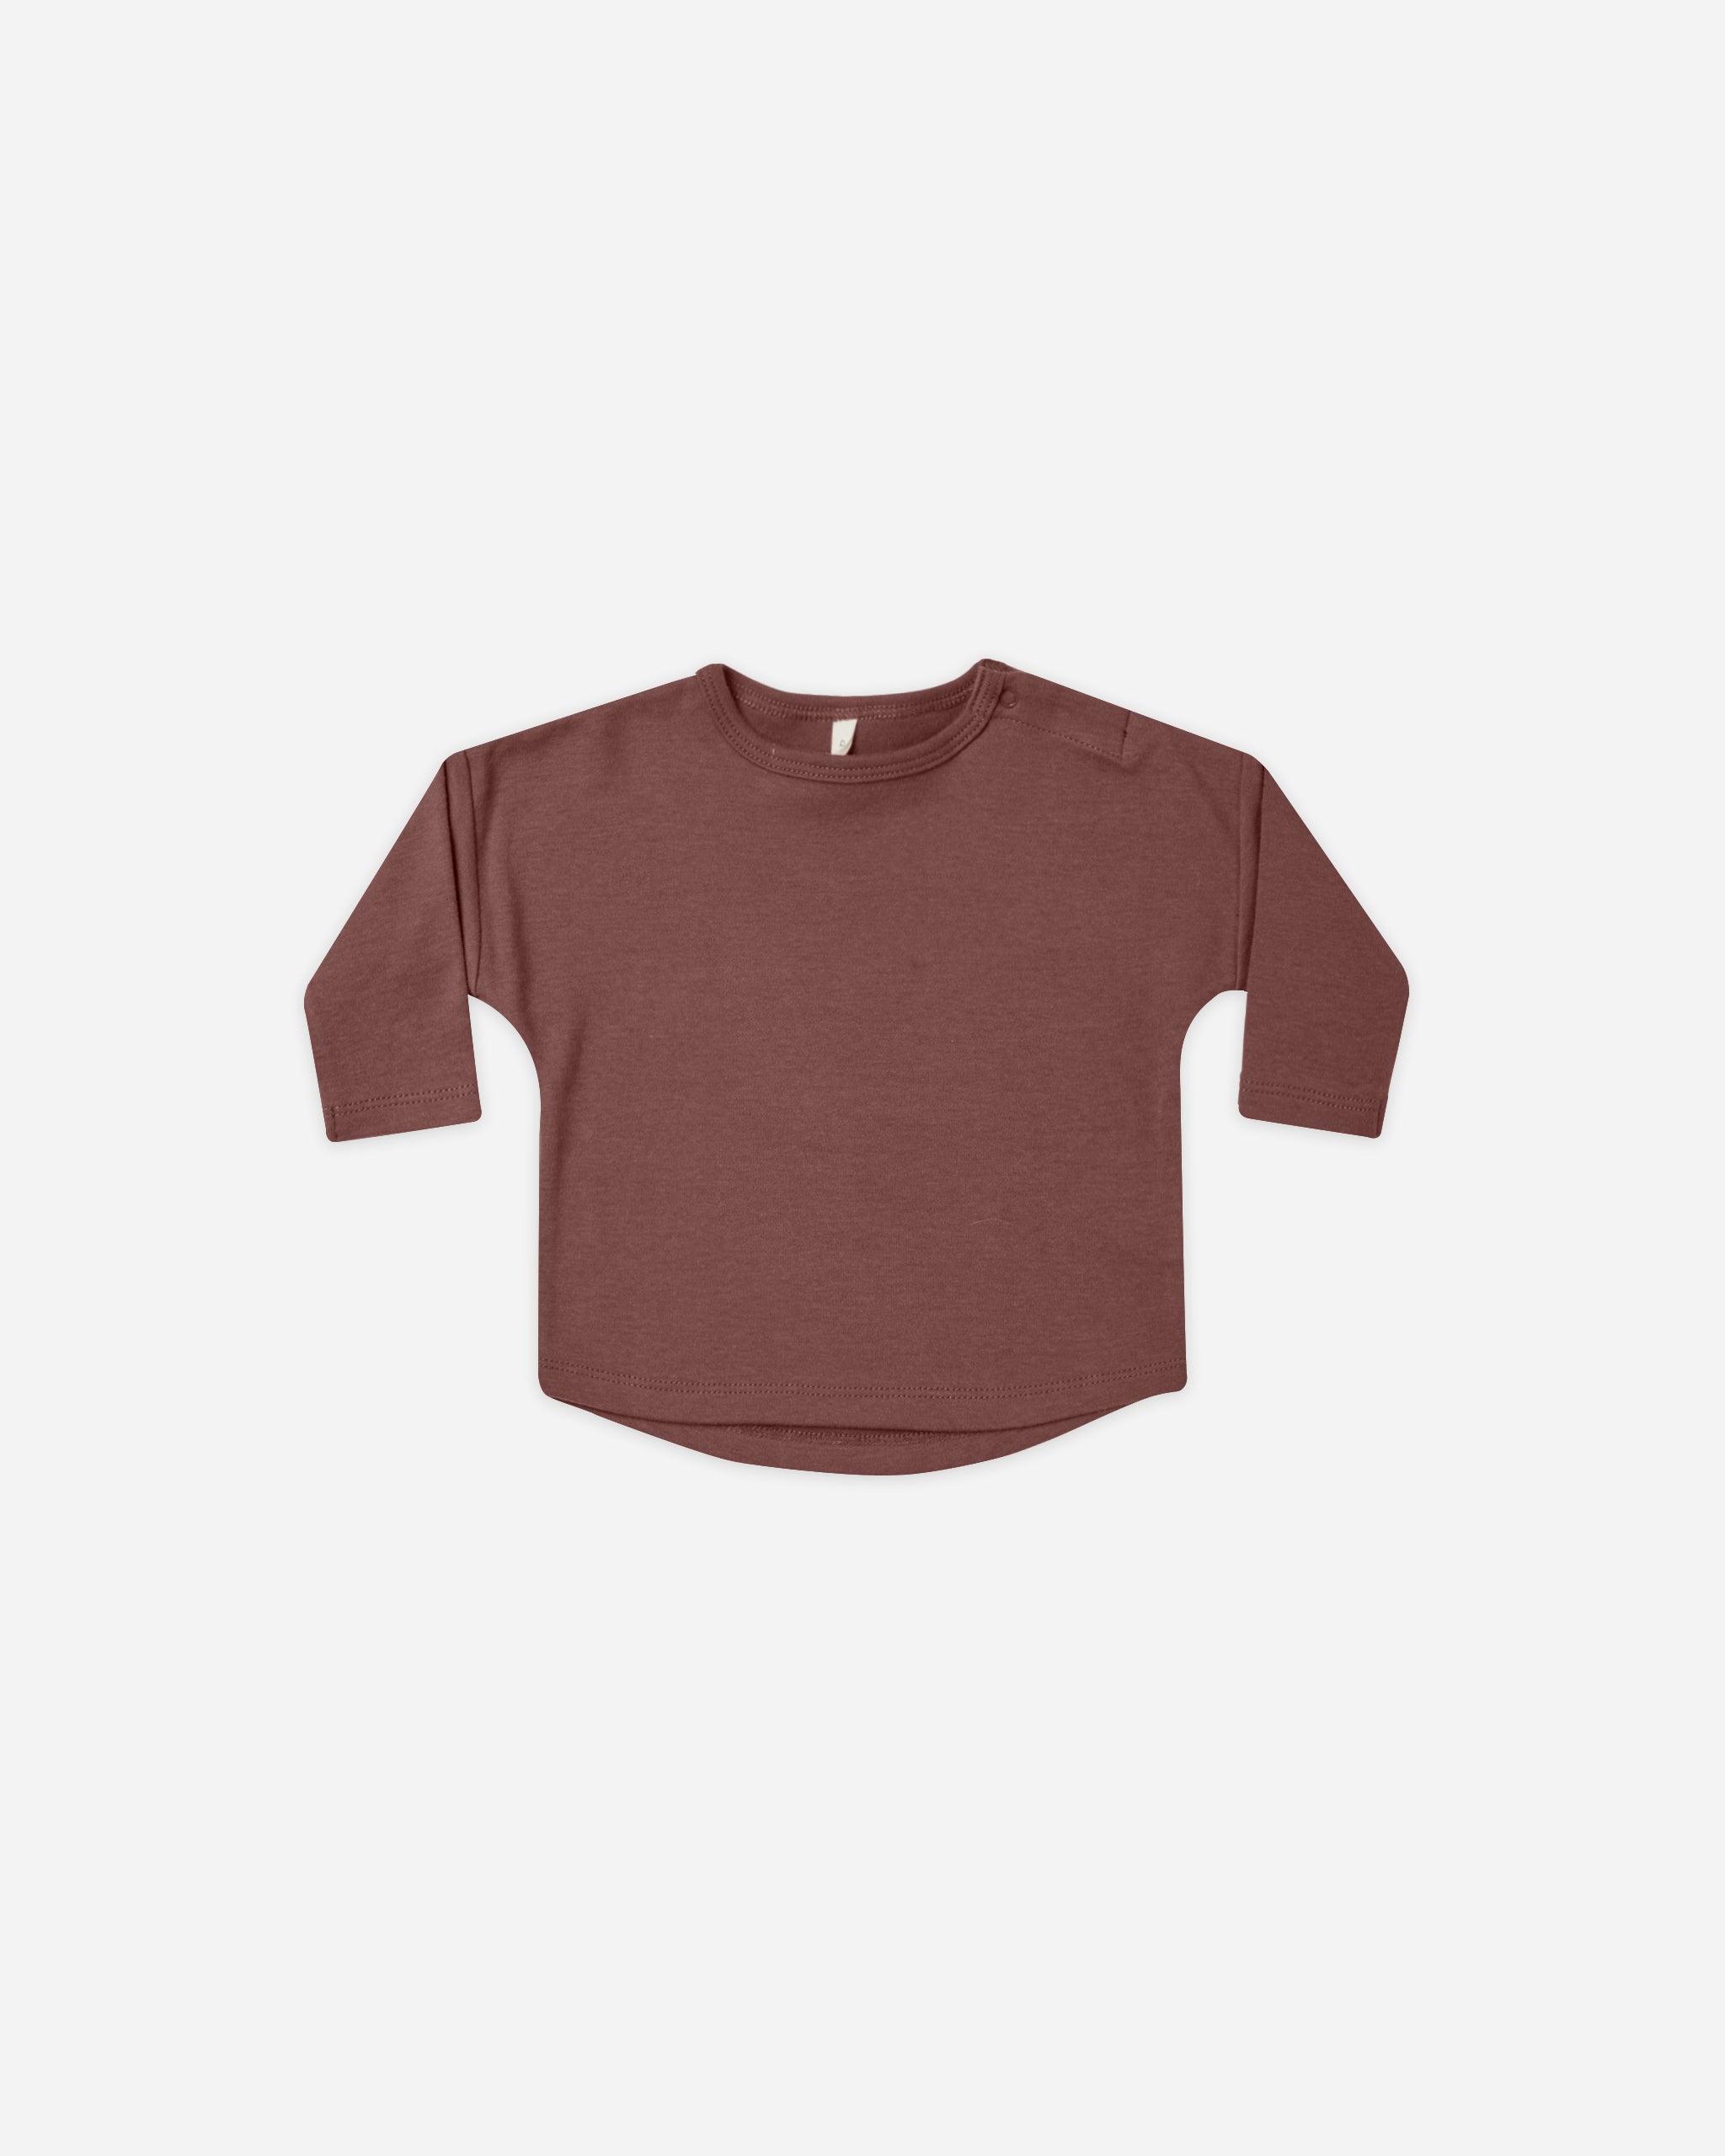 Long Sleeve Tee || Plum - Rylee + Cru | Kids Clothes | Trendy Baby Clothes | Modern Infant Outfits |